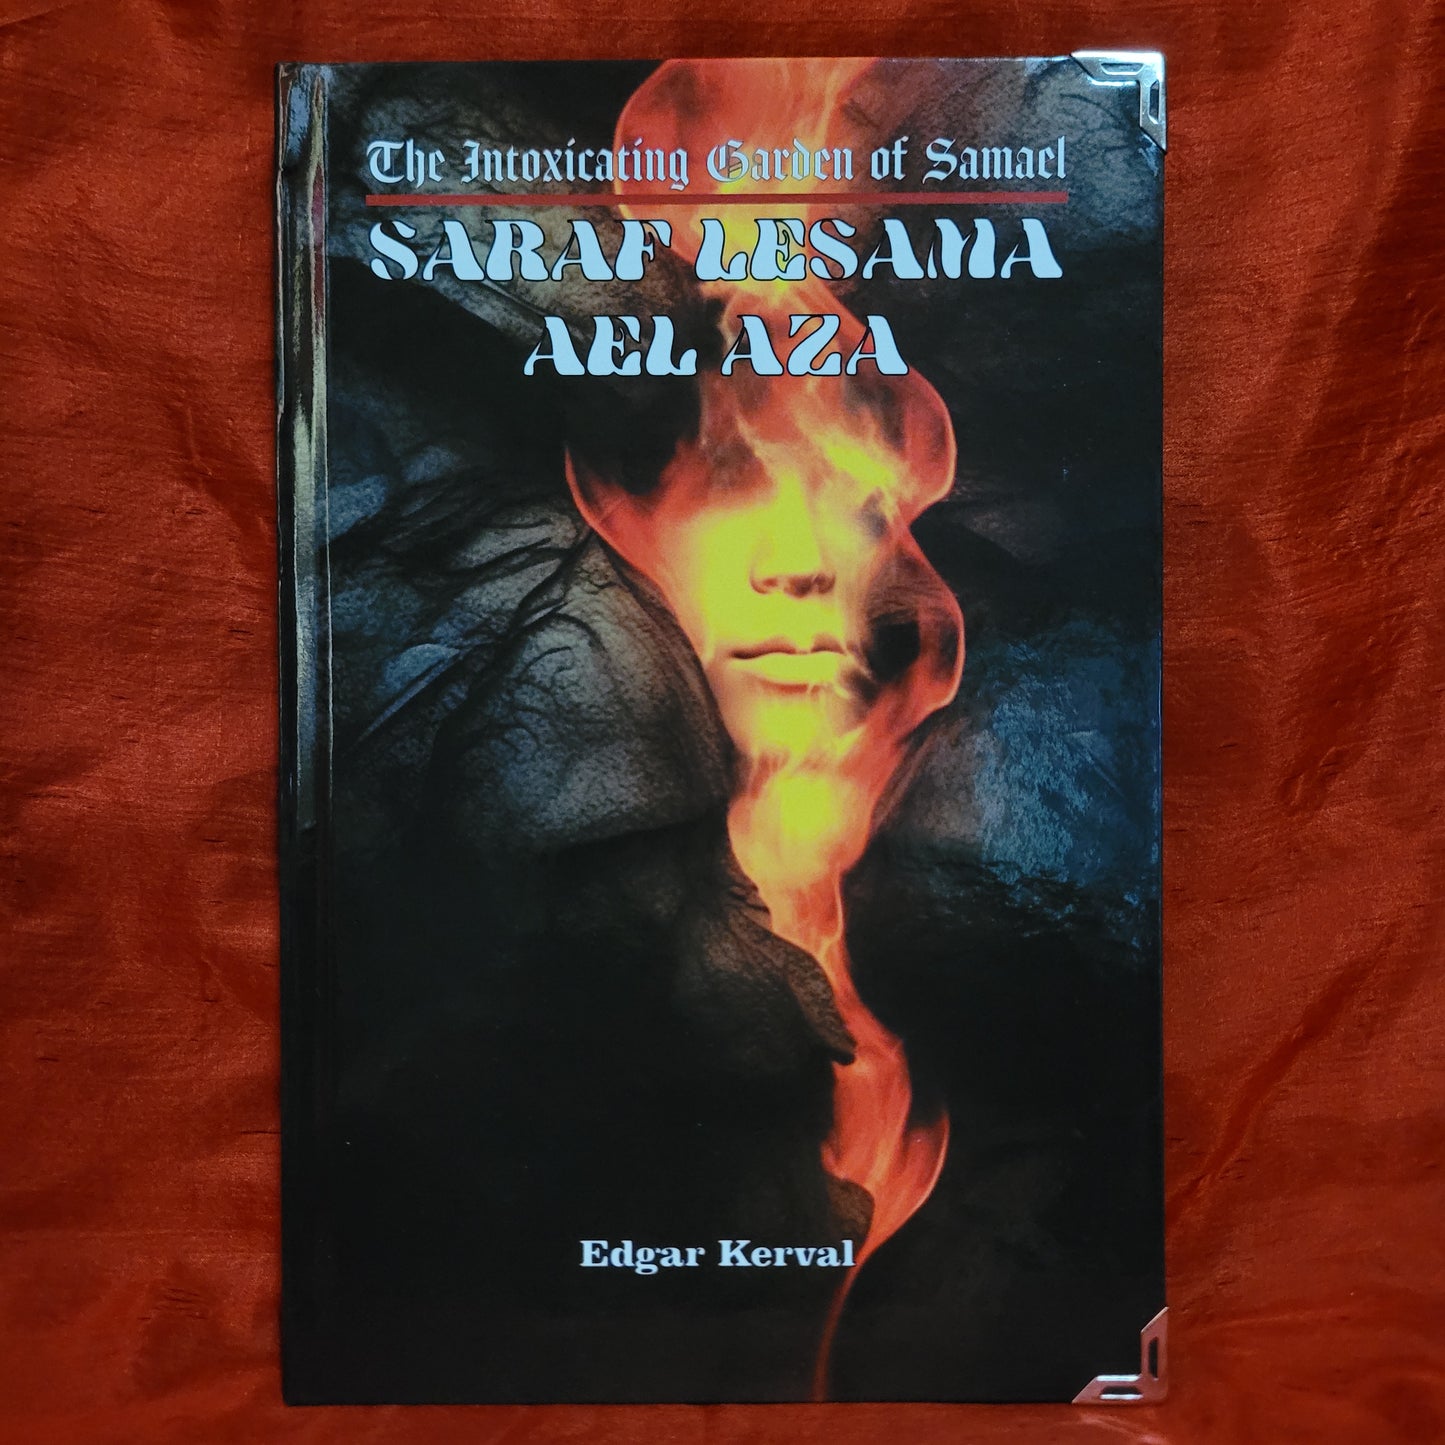 Saraf Lesama Ael Aza: The Intoxicating Garden of Samael by Edgar Kerval (Sirius Limited Esoterica, 2024) Standard Hardcover Edition Limited to 333 copies